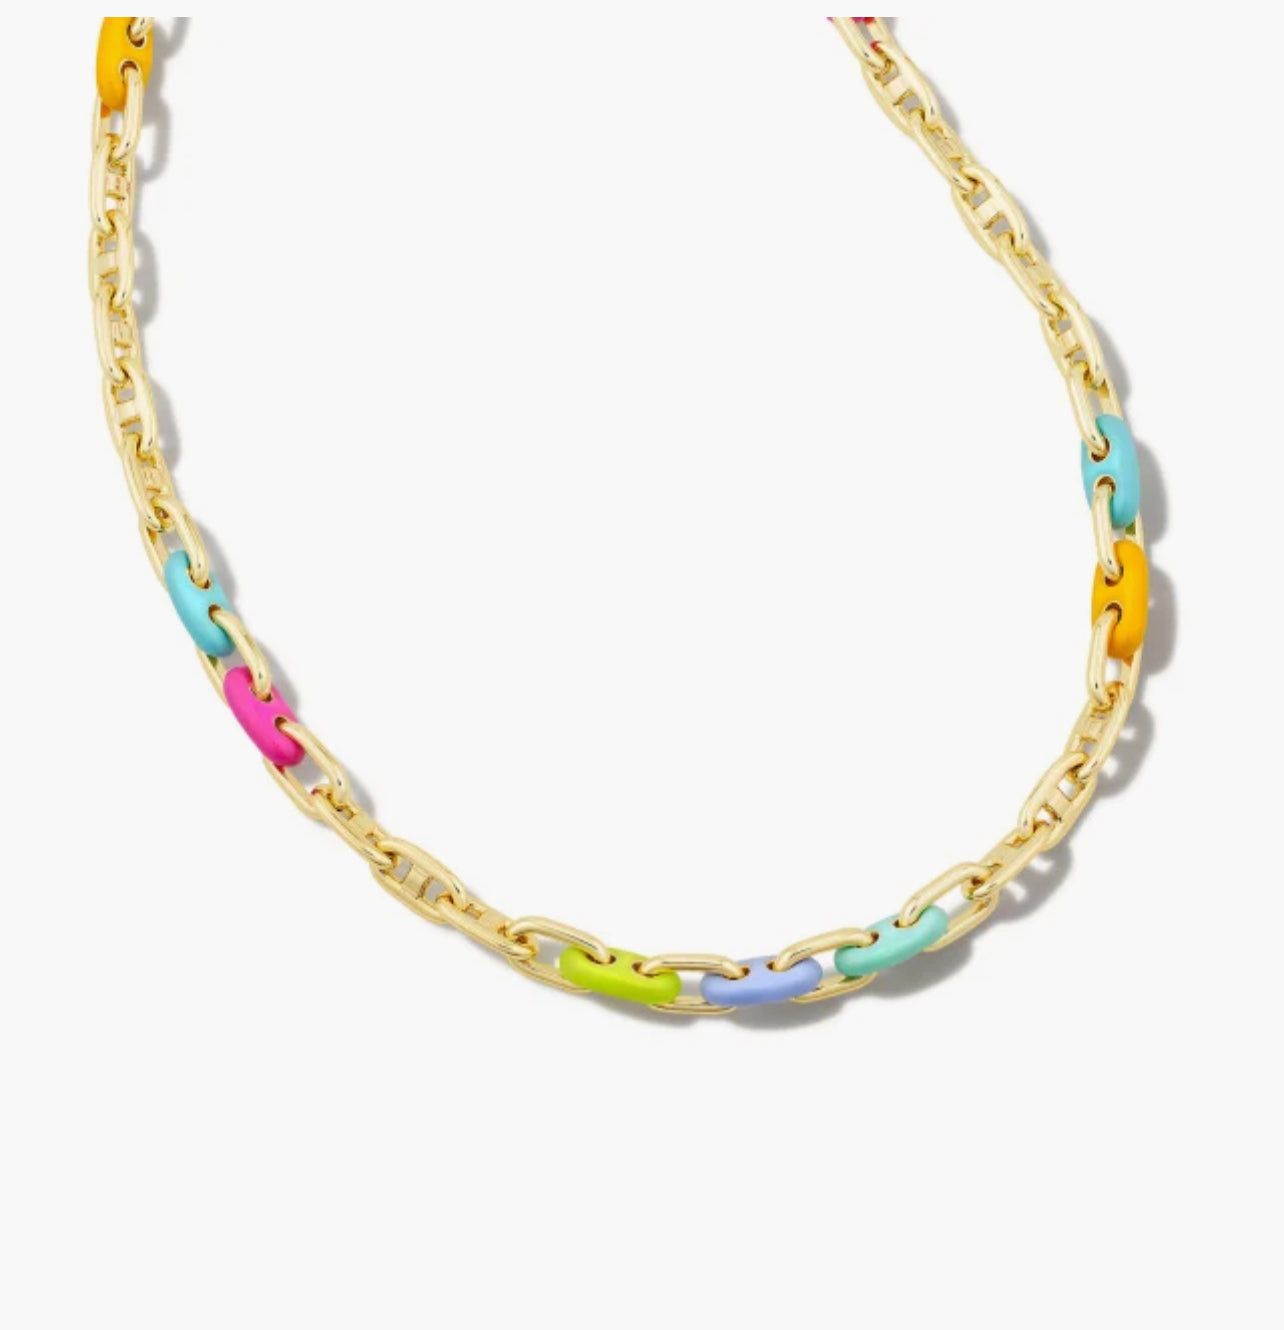 Kendra Scott-Bailey Gold Chain Necklace in Rainbow Multi Mix 9608850955